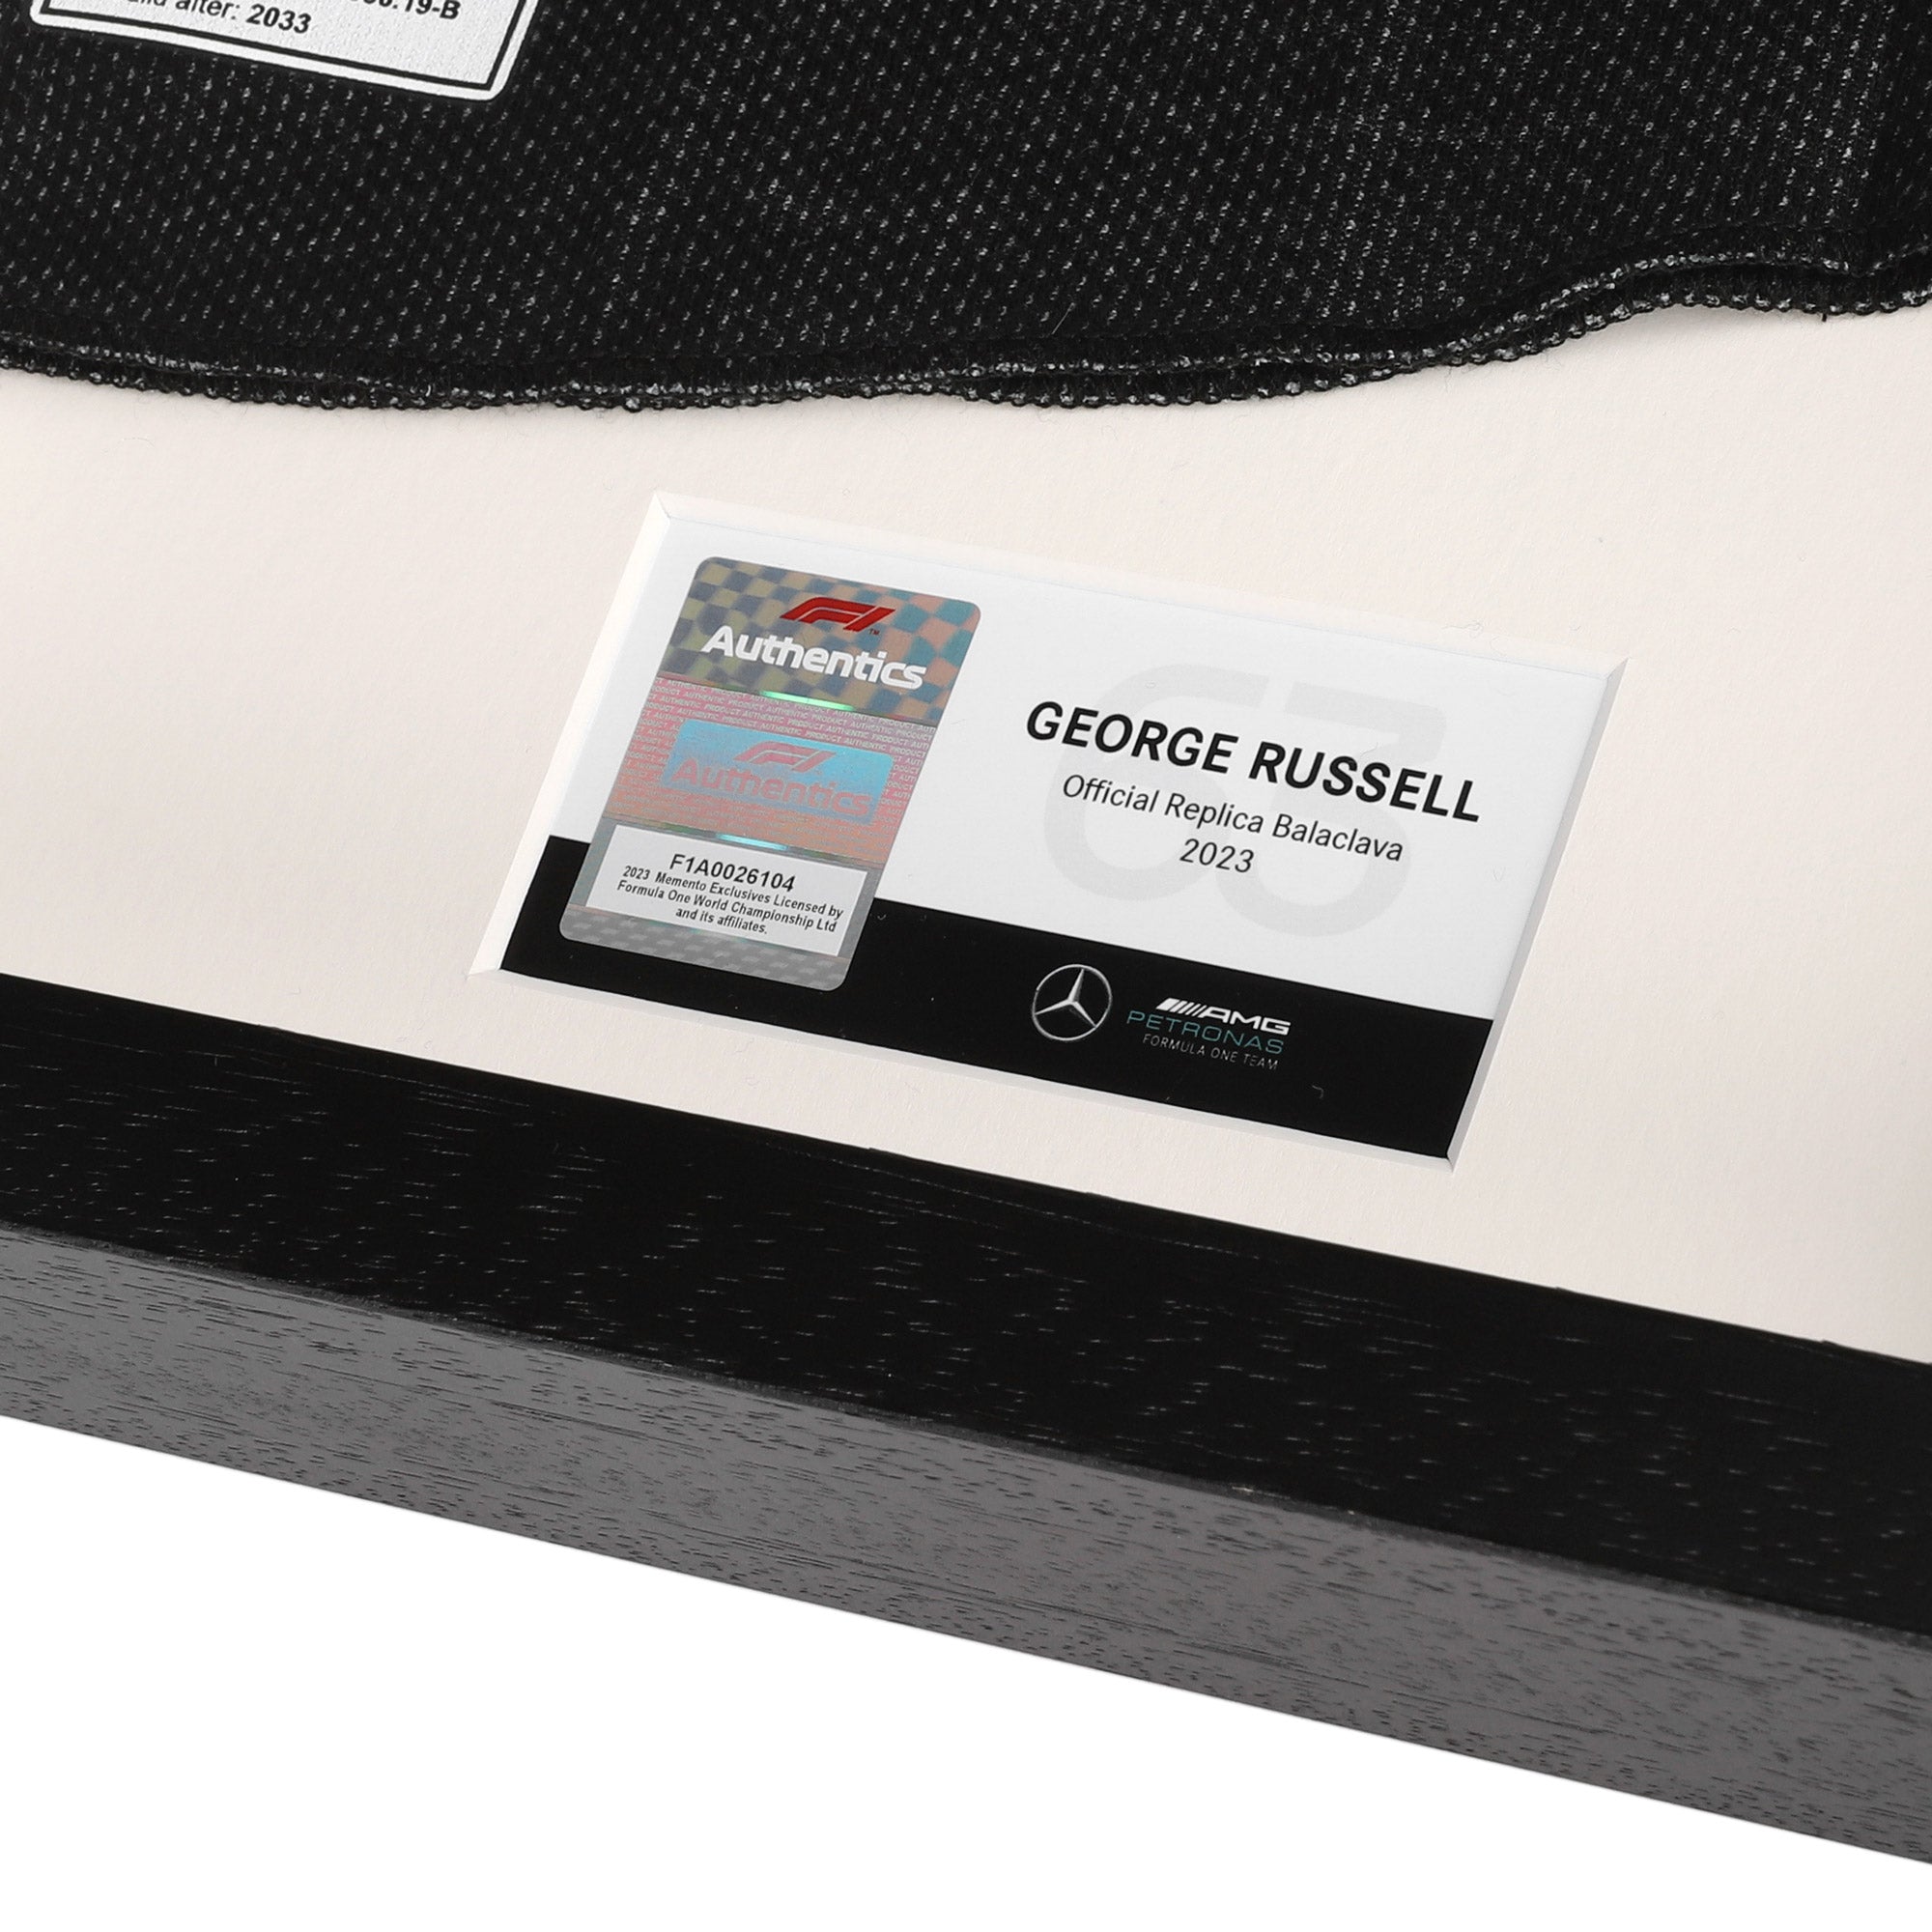 Officially Licensed 2023 Mercedes-AMG Petronas F1 Team Balaclava - George Russell Edition